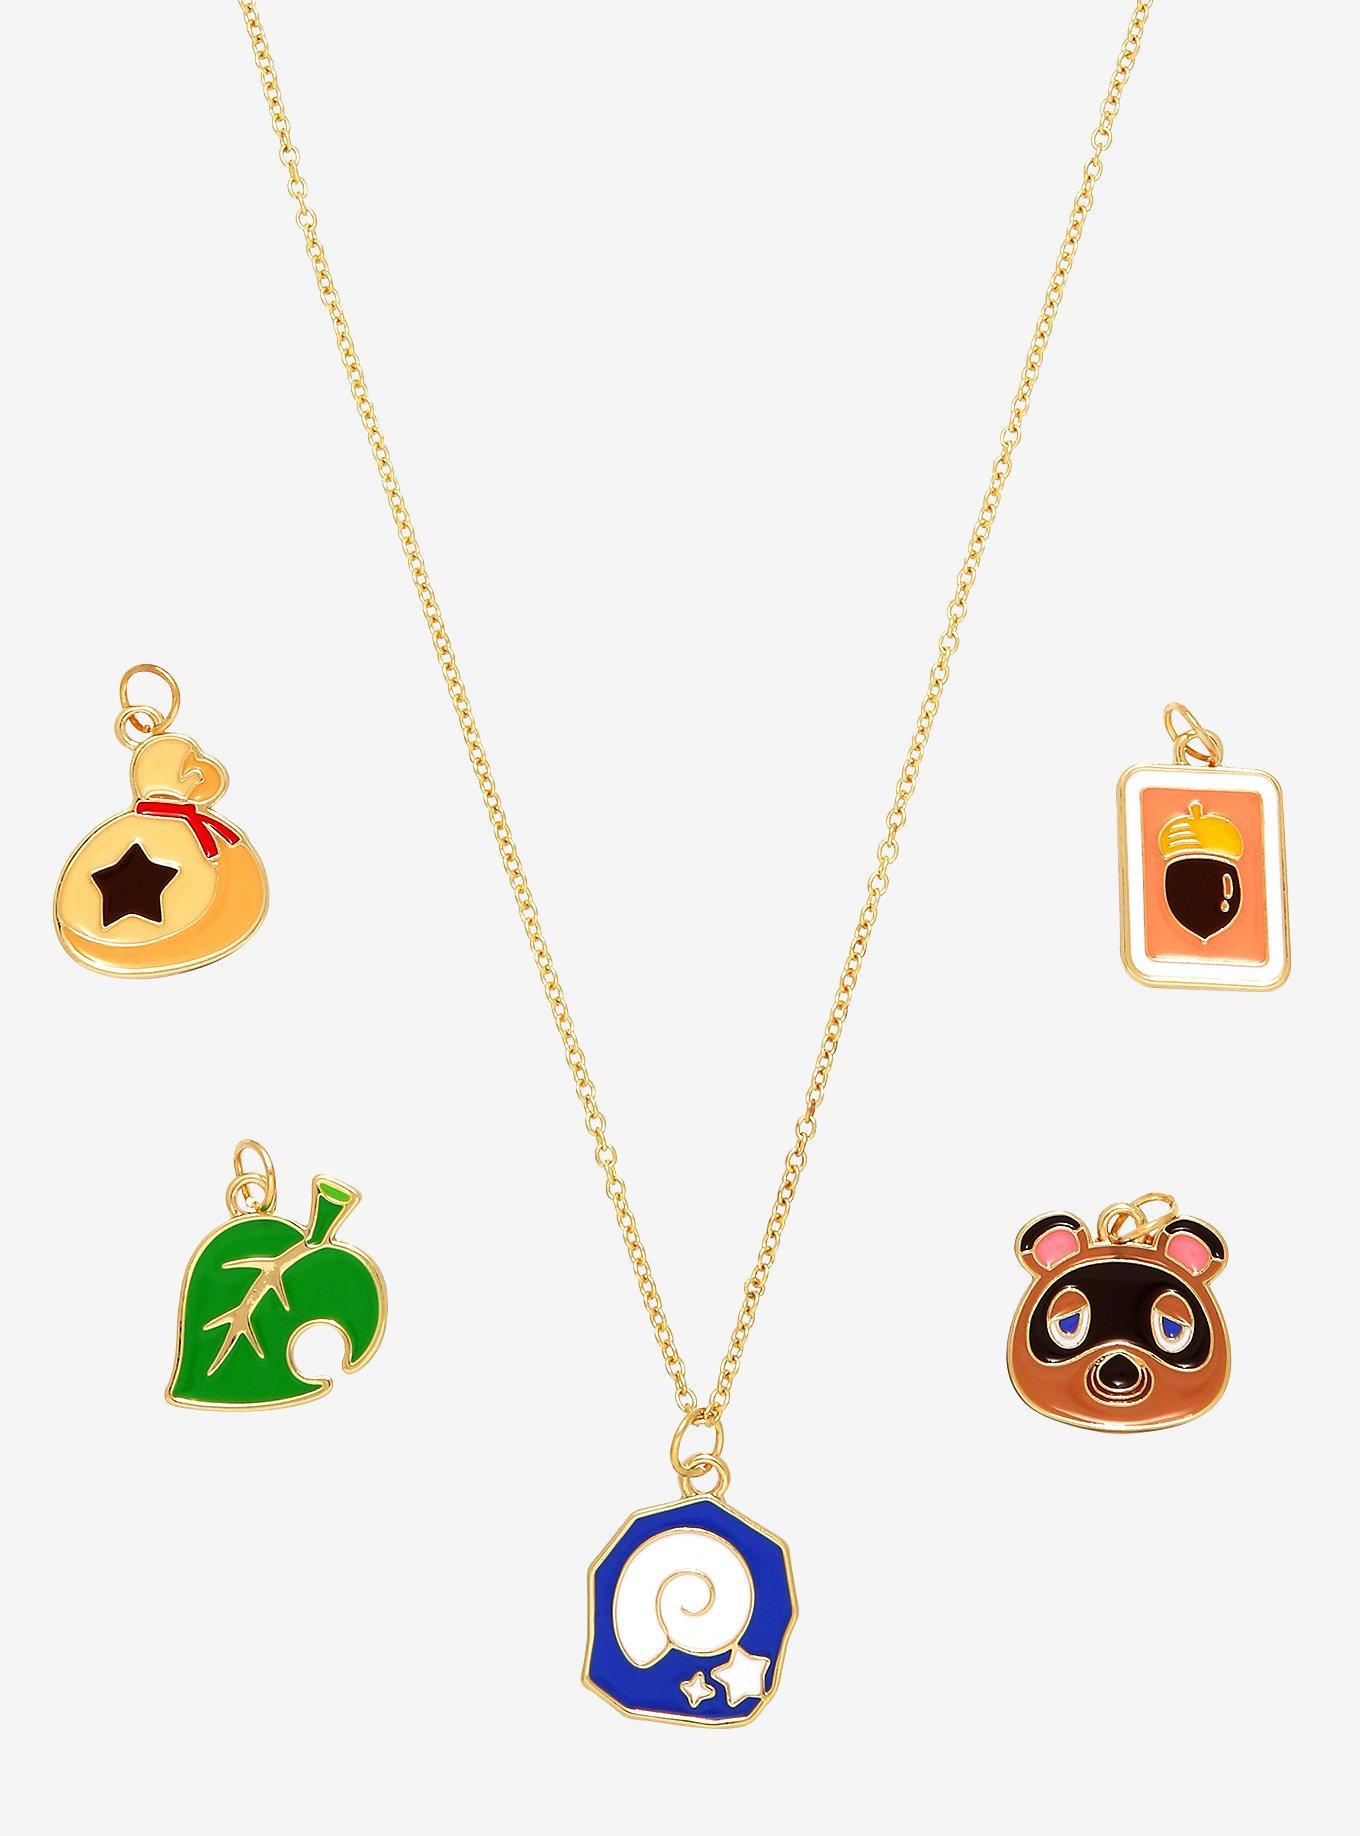 Animal Crossing: New Horizons Tom Nook Interchangeable Charm Necklace, , hi-res